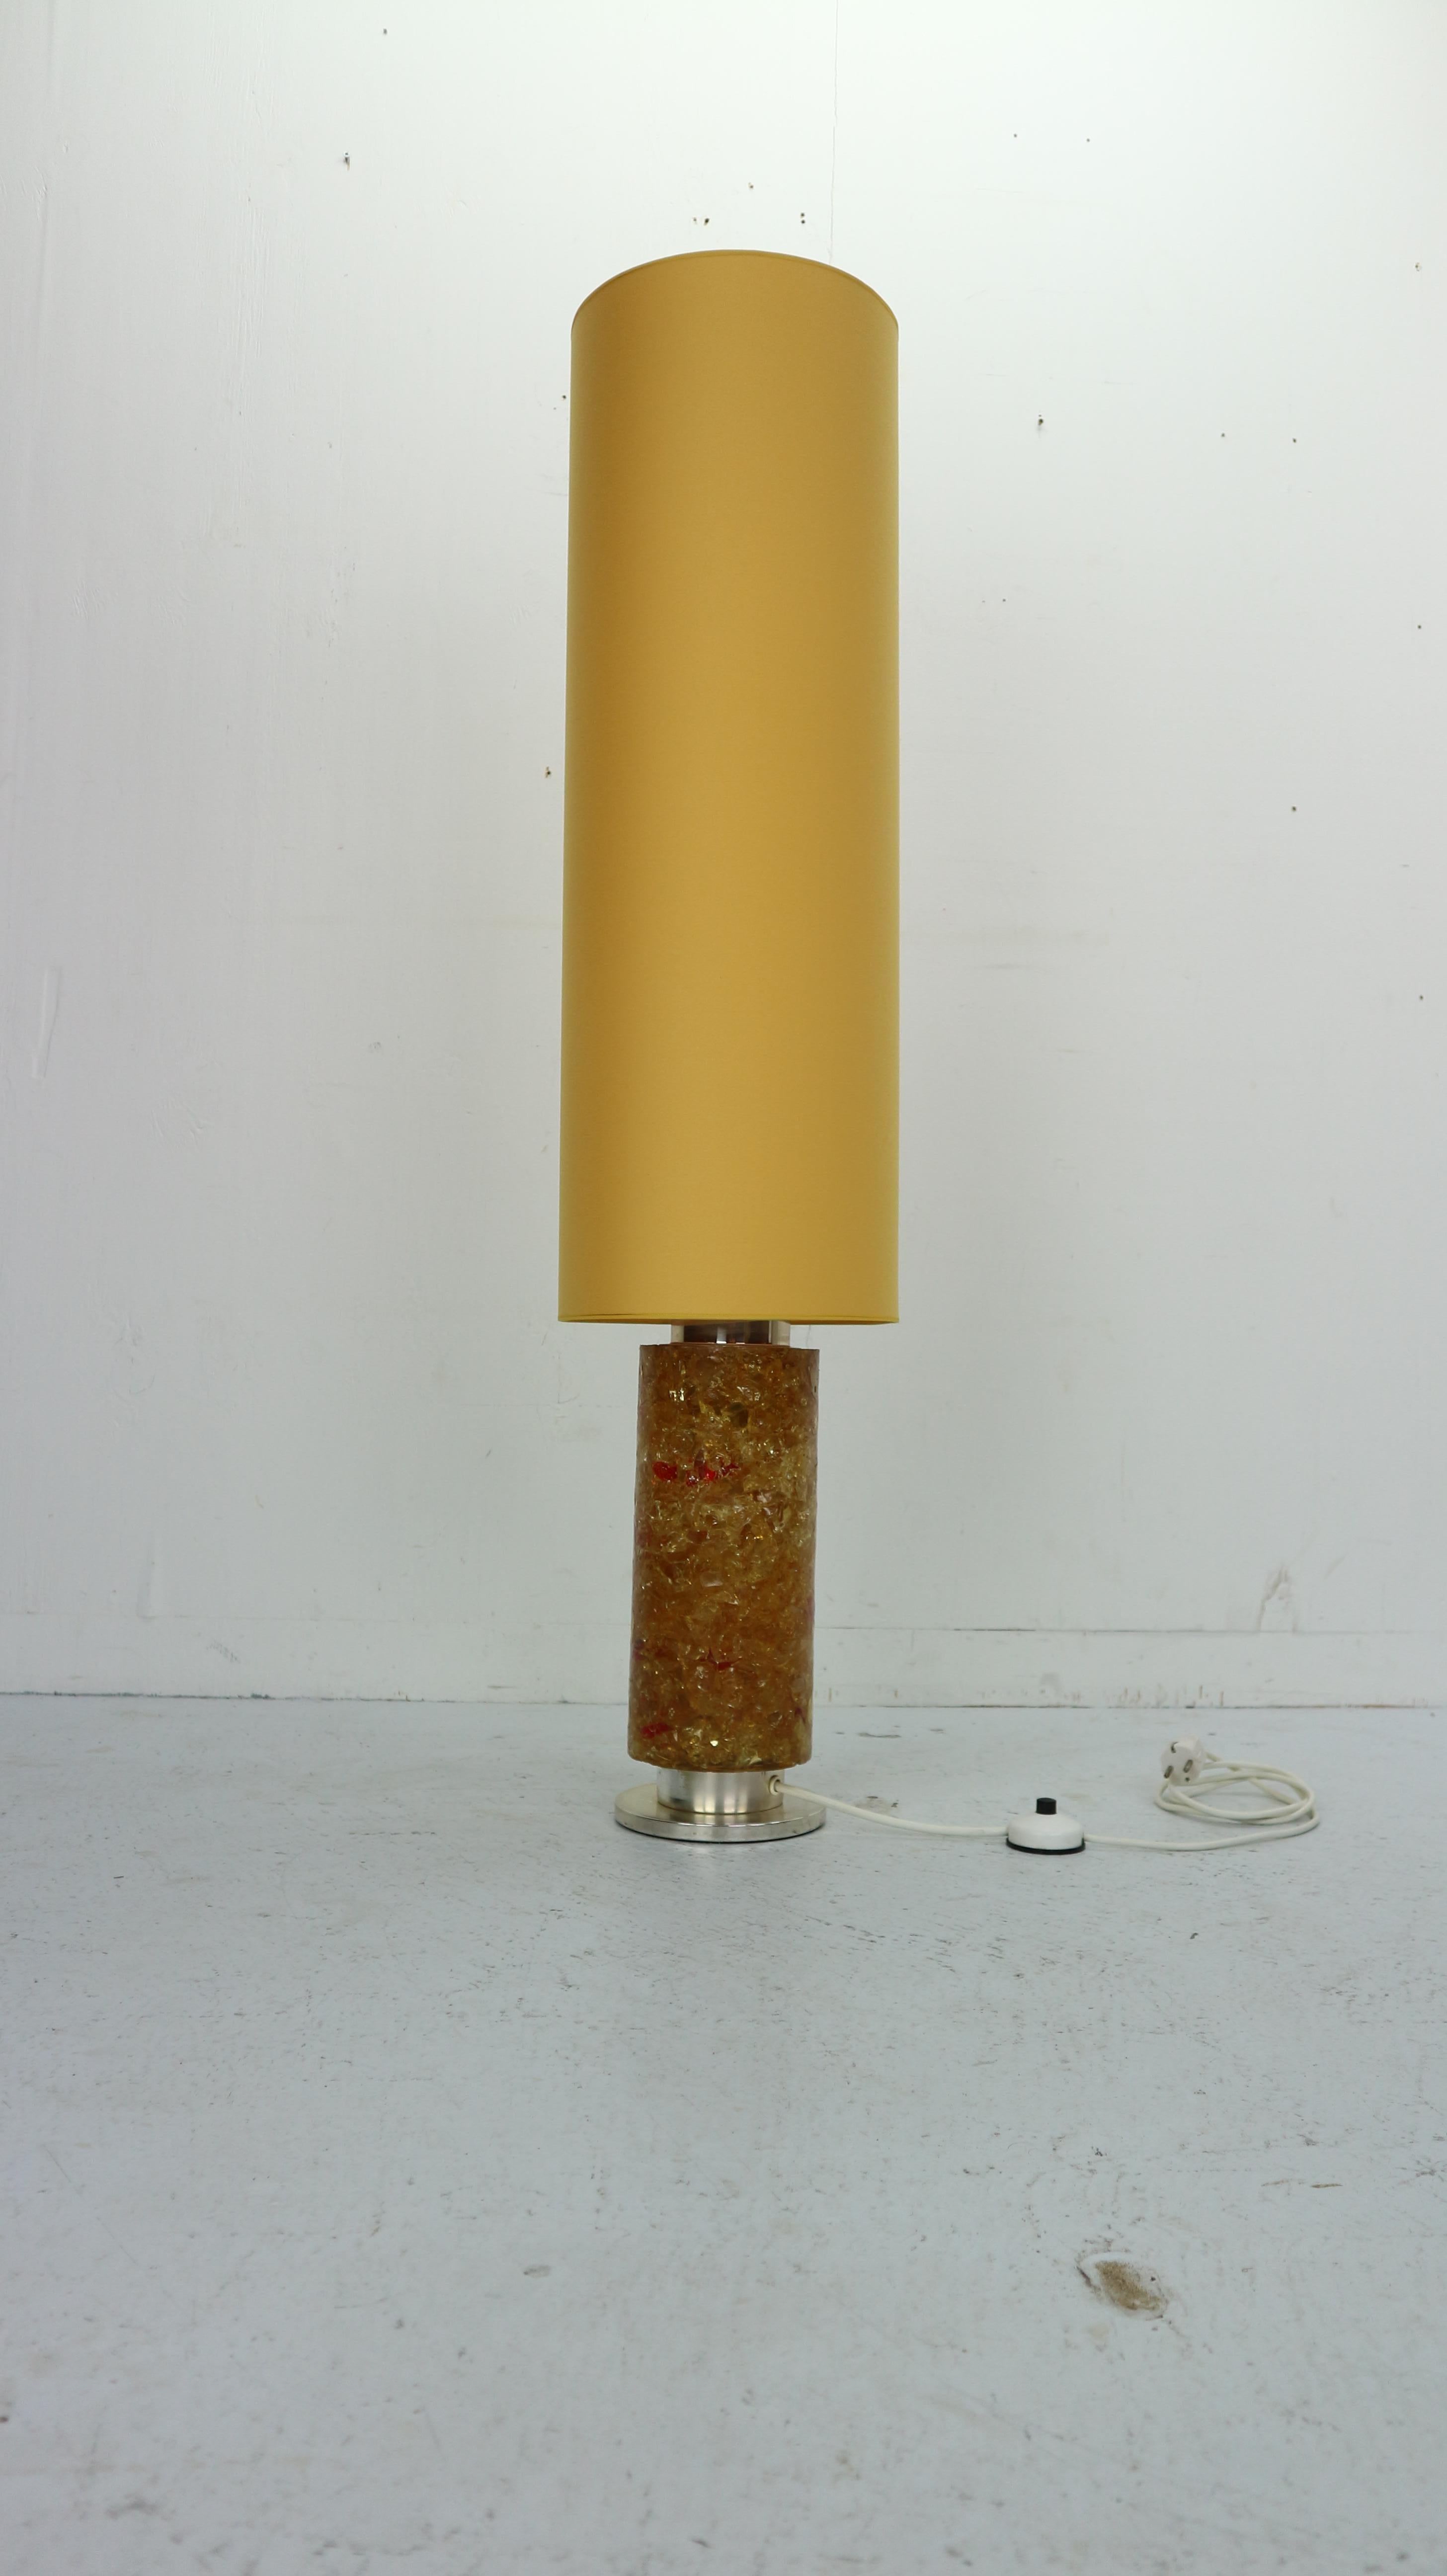 Mid-Century Modern design vintage floor lamp made in 1970s Belgium.
Warm amber color lamp stand is made from epoxy glass.
Lamp shade has been newly reupholstered in yellow color fabric.
  